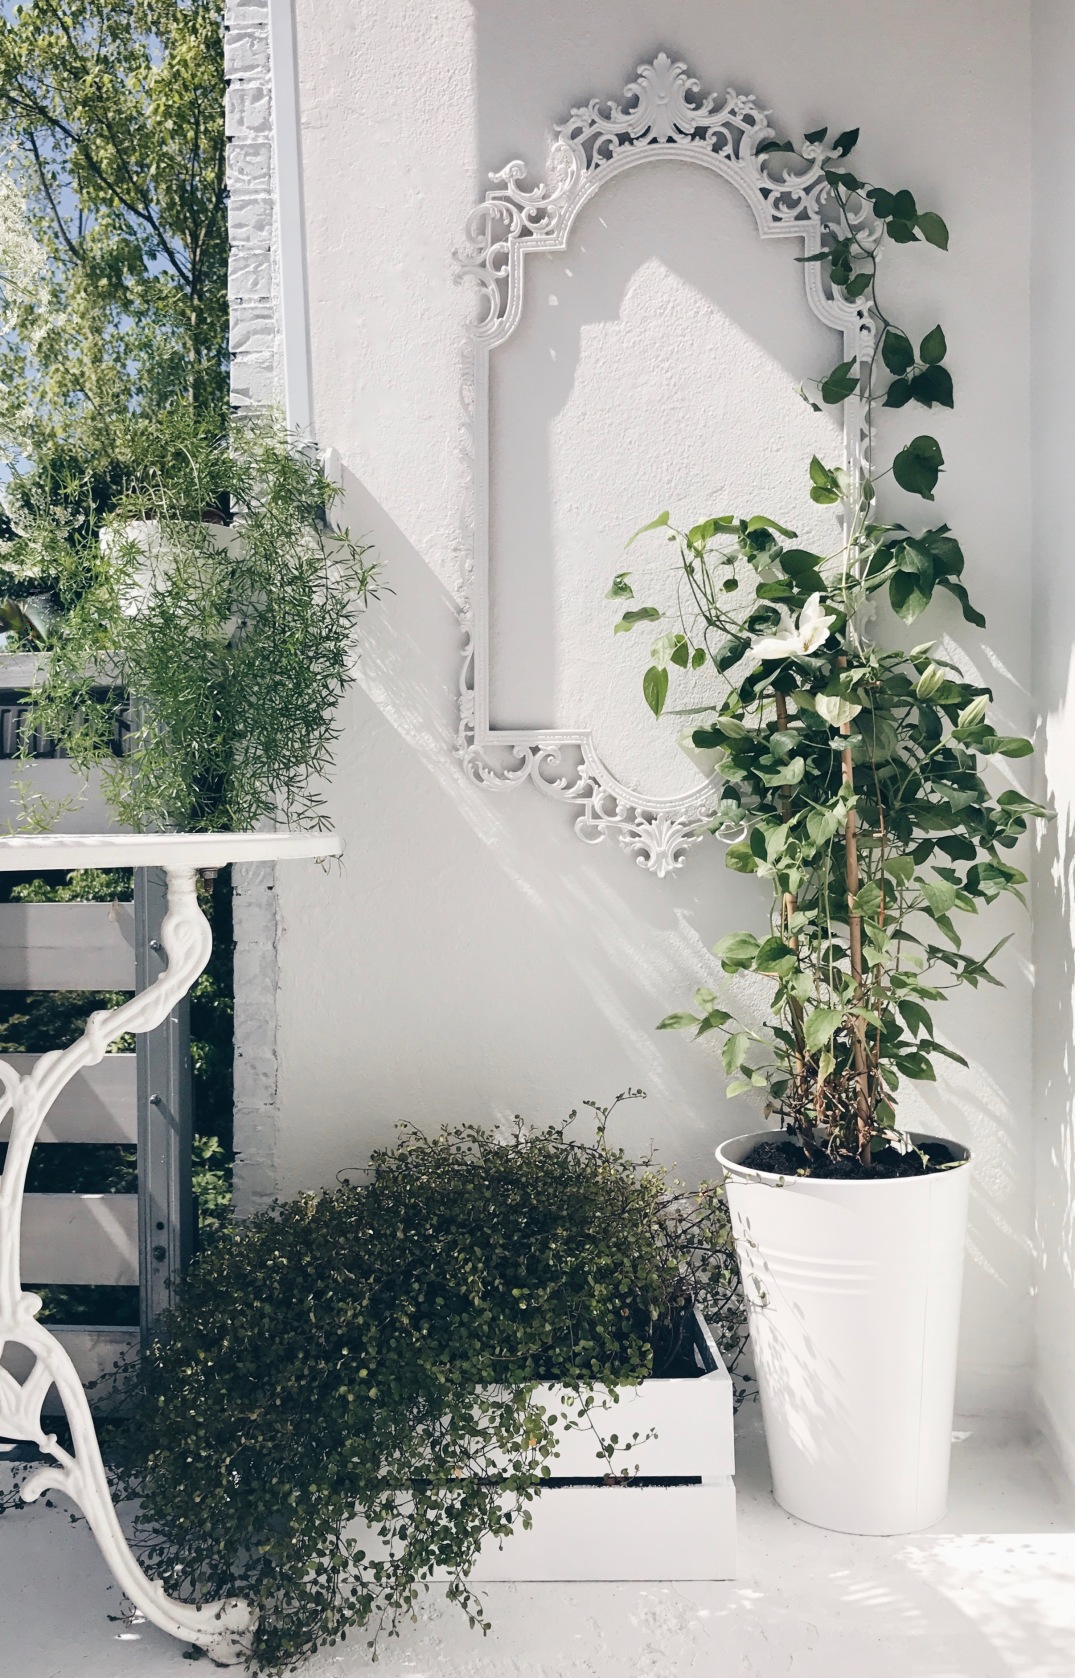 DIY trellis for my clematis - painted with All White from Farrow & Ball 